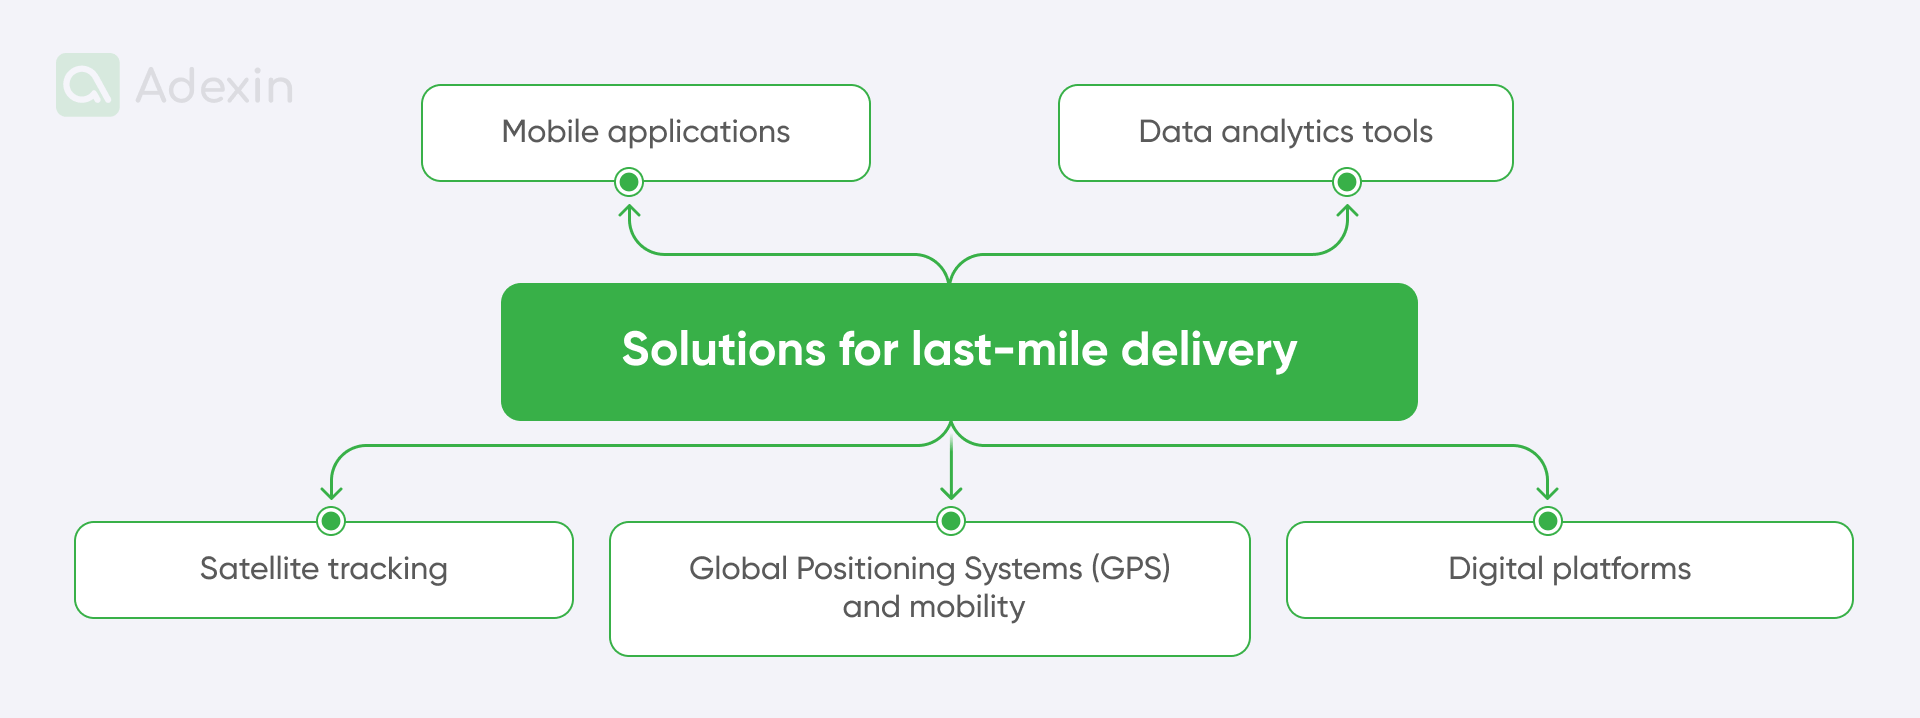 Elements of solutions for last-mile delivery